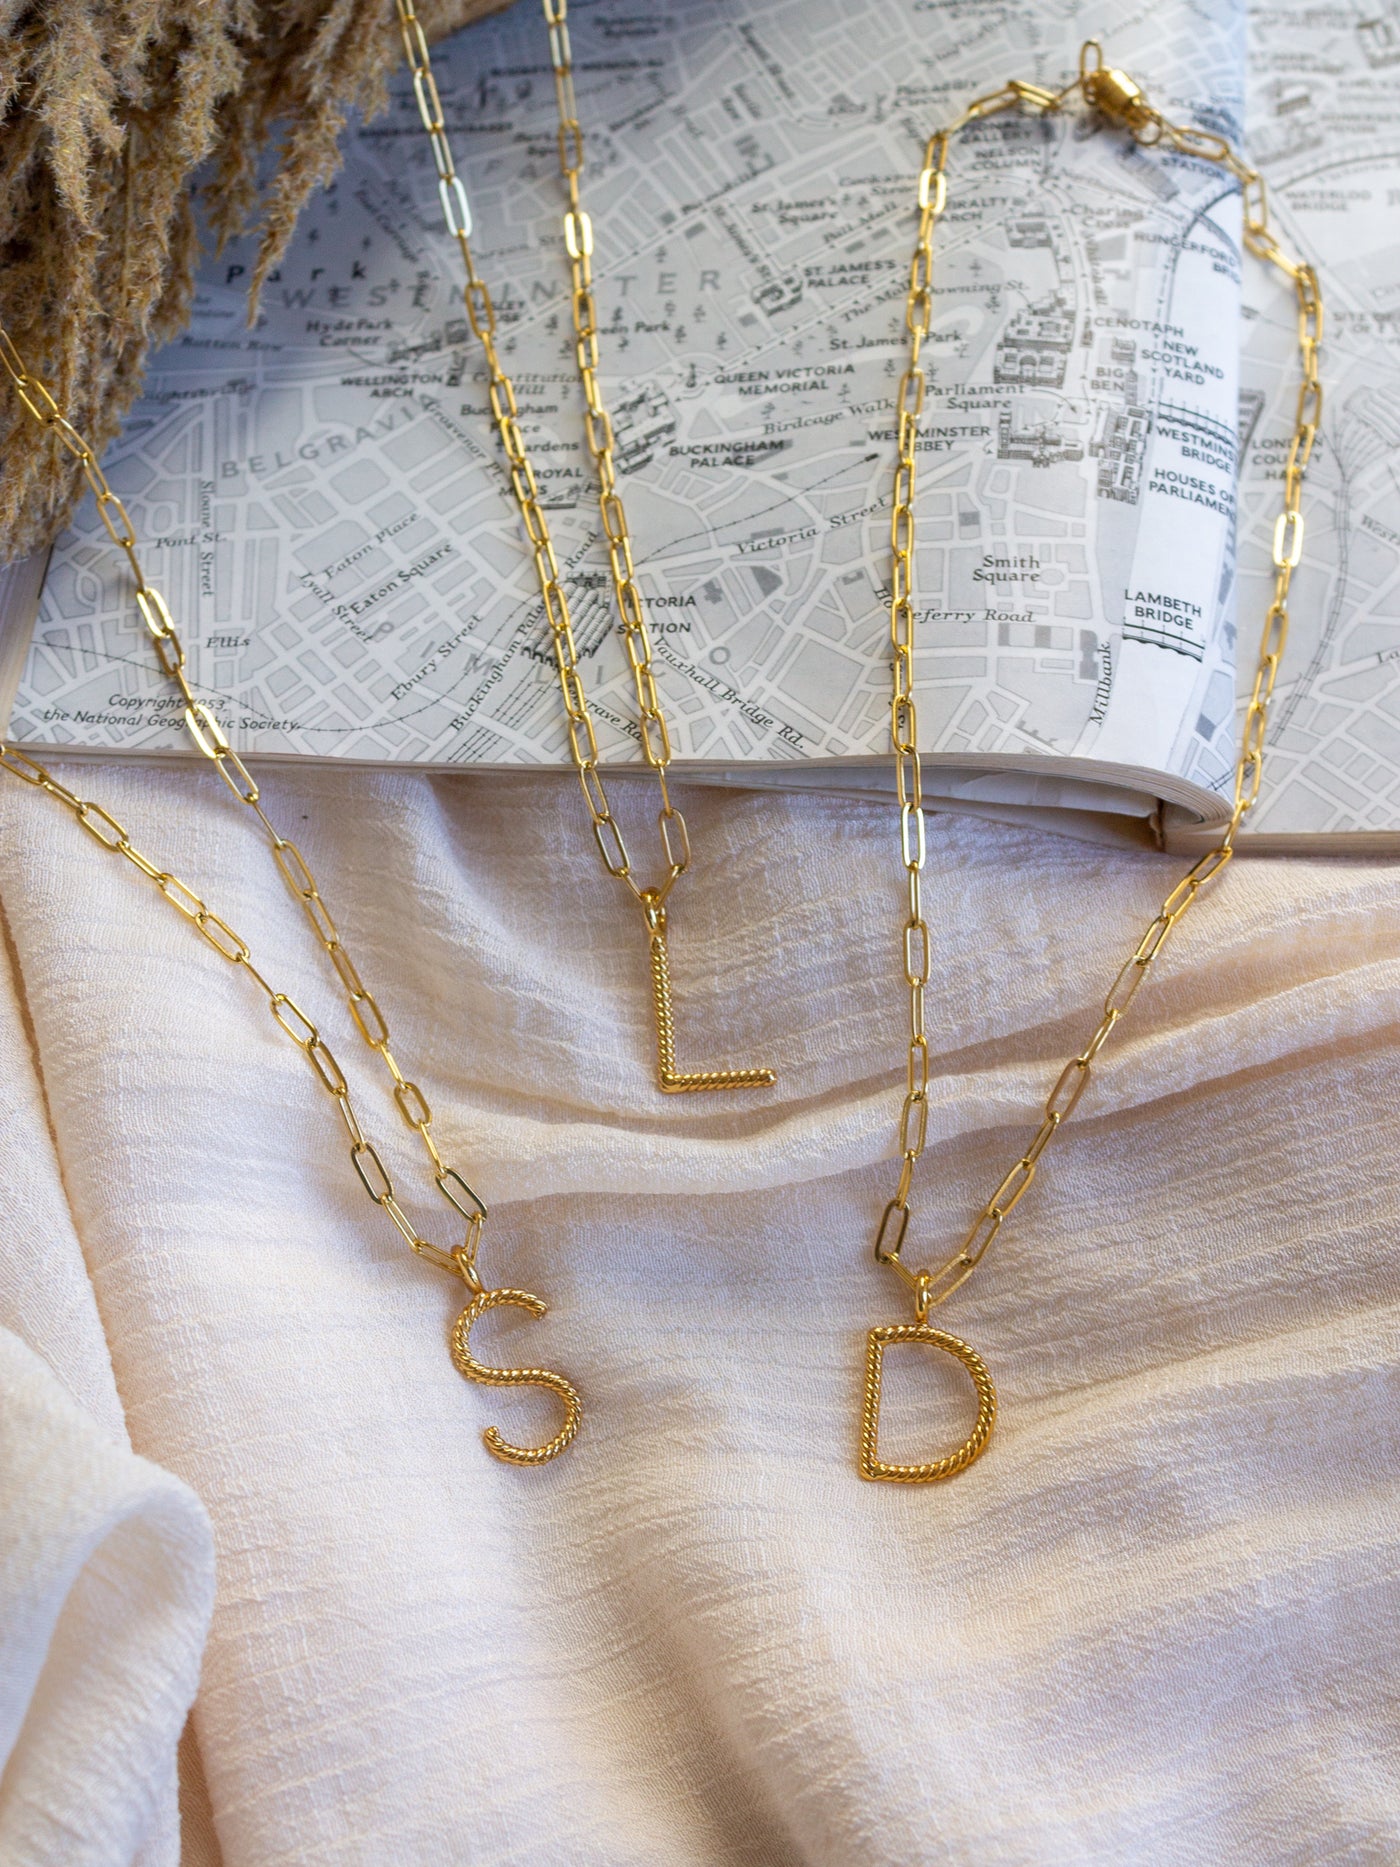 A group of square link chain necklace with with a twisted gold initial attached. The letters are S, L, and D.